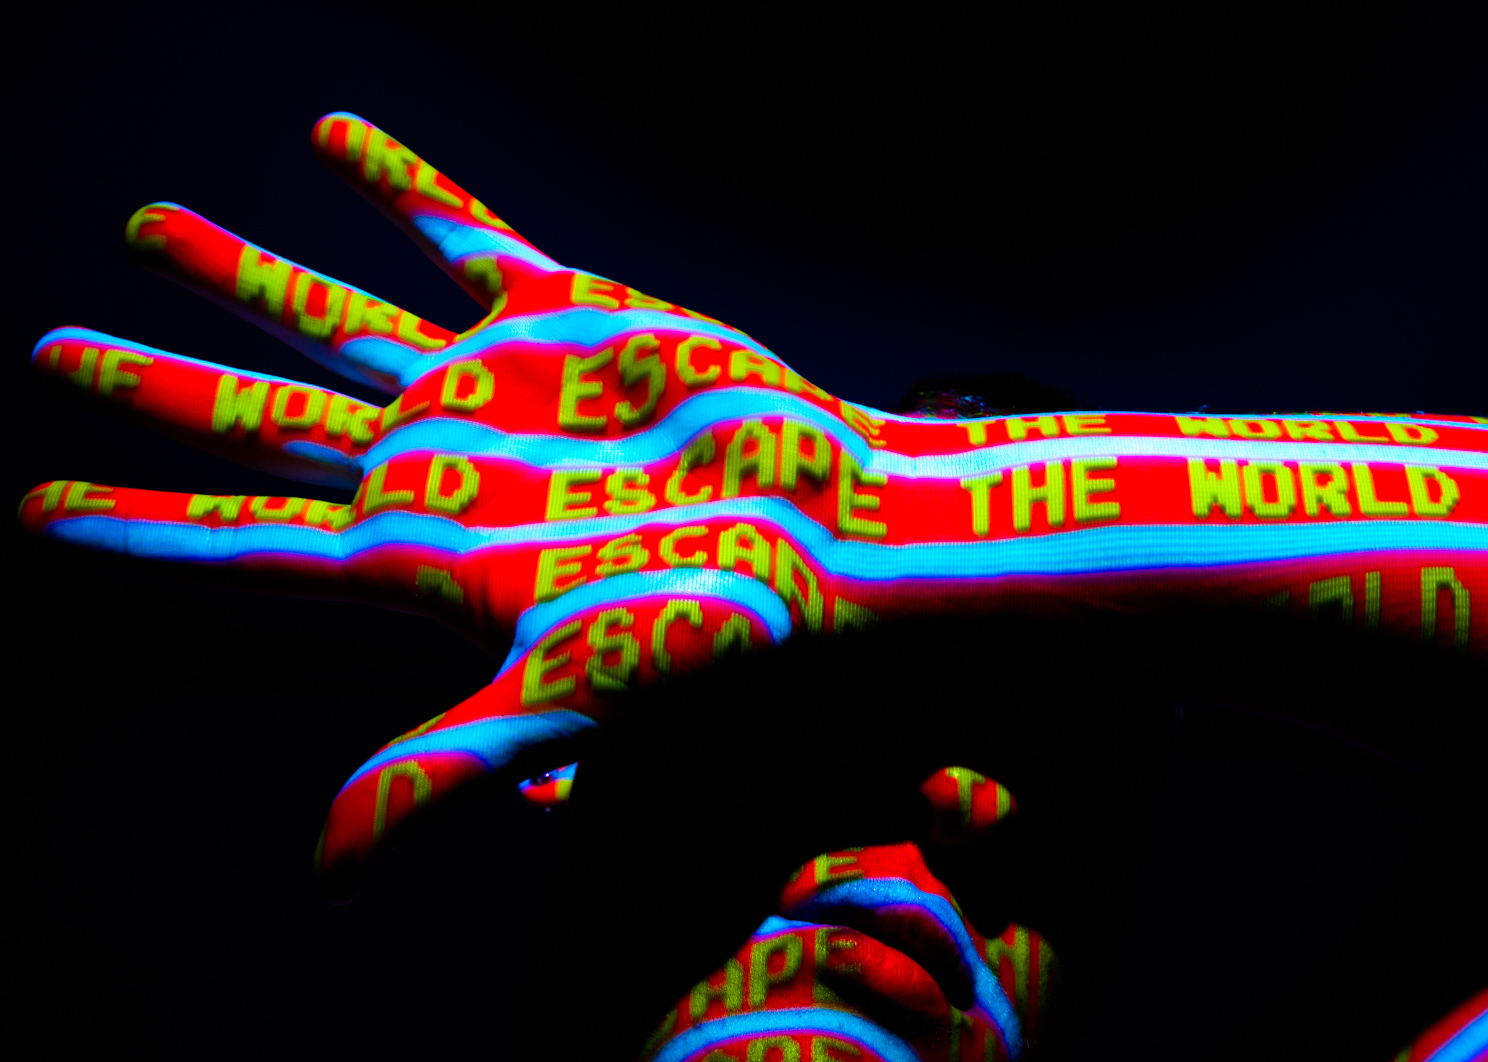 Colour image of a portrait of a man covering his face with his hand. Projected digital imagery covers his face. The words "escape the world" are displayed on his skin.